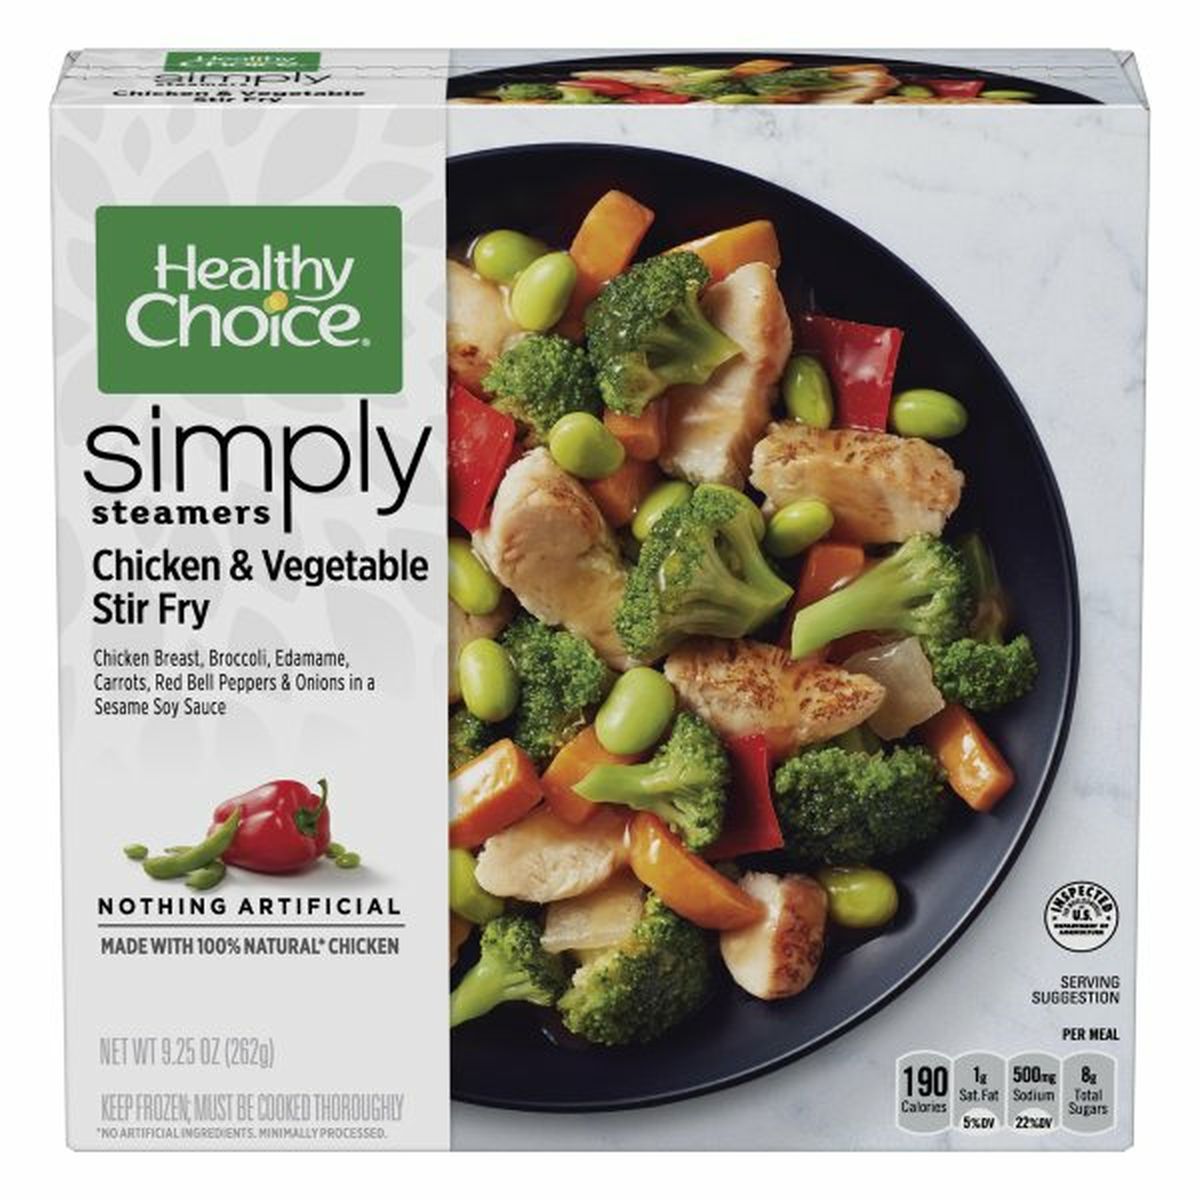 Calories in Healthy Choice Simply Steamers Chicken & Vegetable Stir Fry